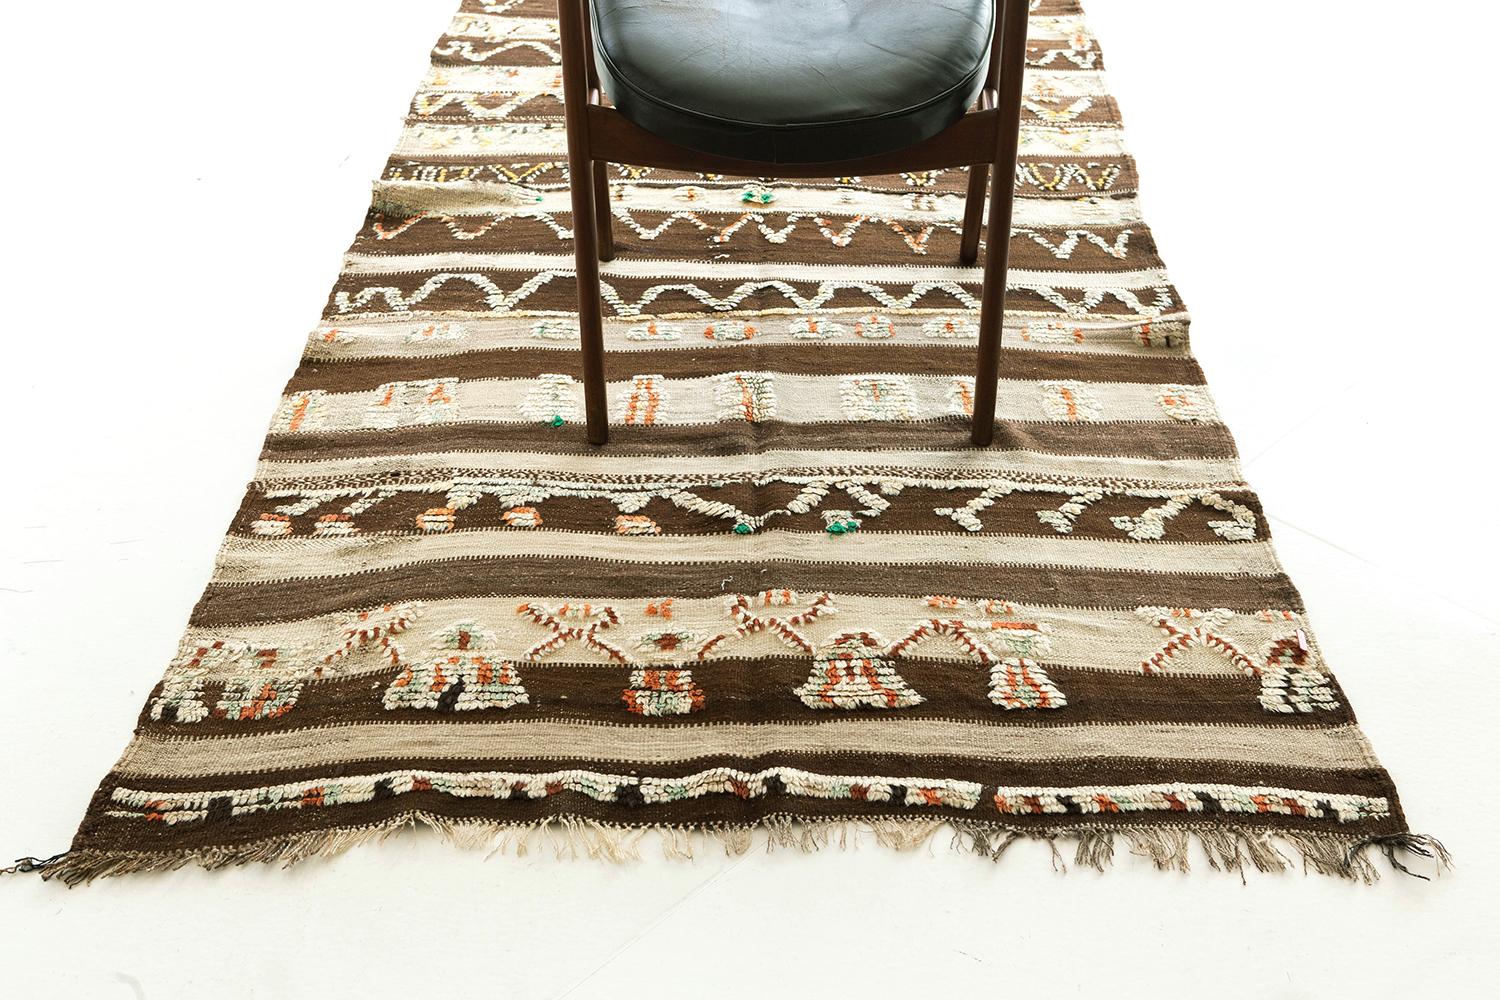 Banded flatweave in alternating natural brown and ivory with rows of repeat motifs rendered in ivory, brick-red and sage green knotted pile. An intriguing combination of textures. This is a unique vintage tribal rug from the Atlas Mountains of